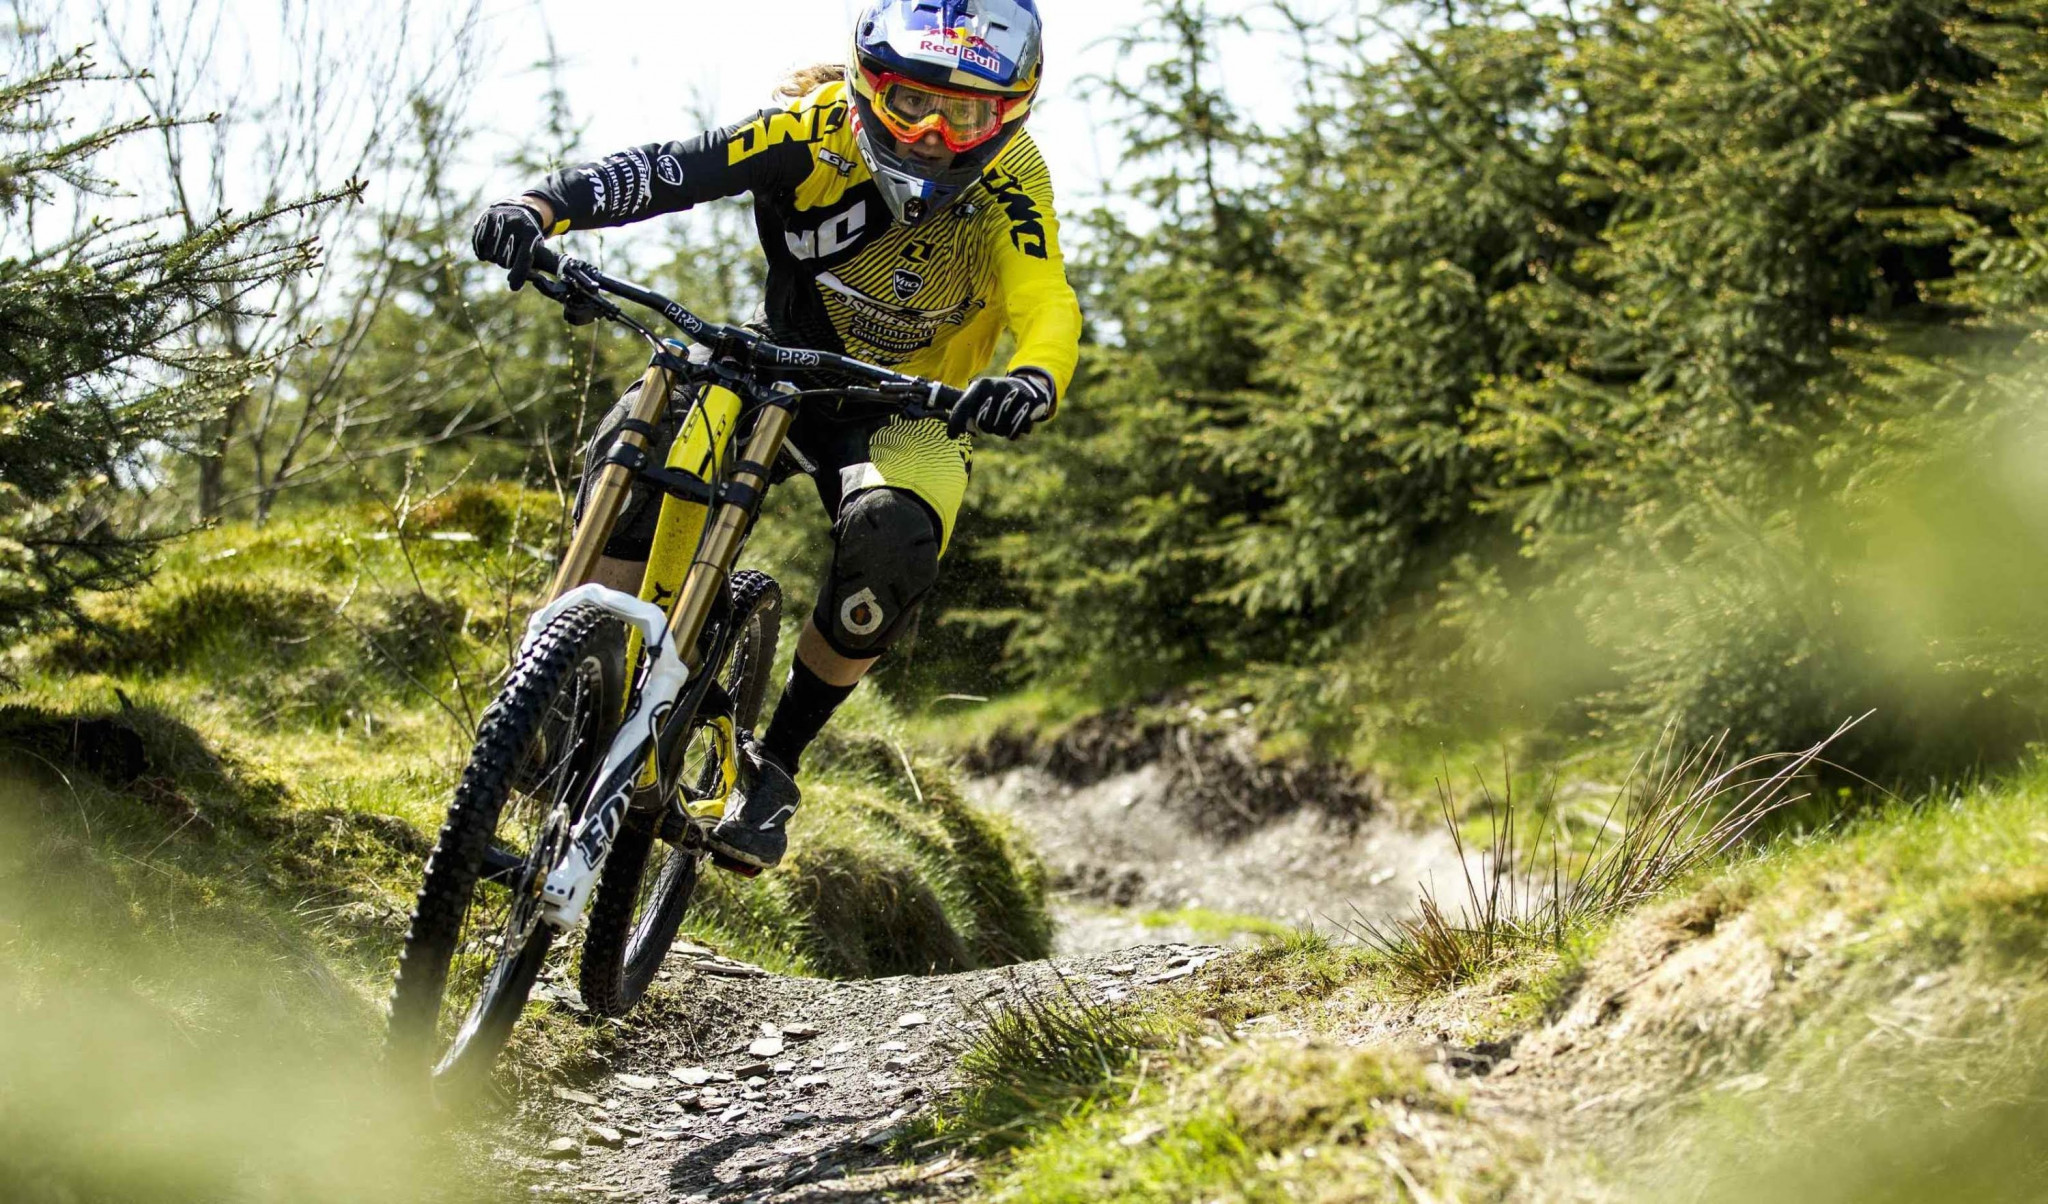 Four-time world champion Rachel Atherton of Britain topped the women's qualification standings ©YouTube